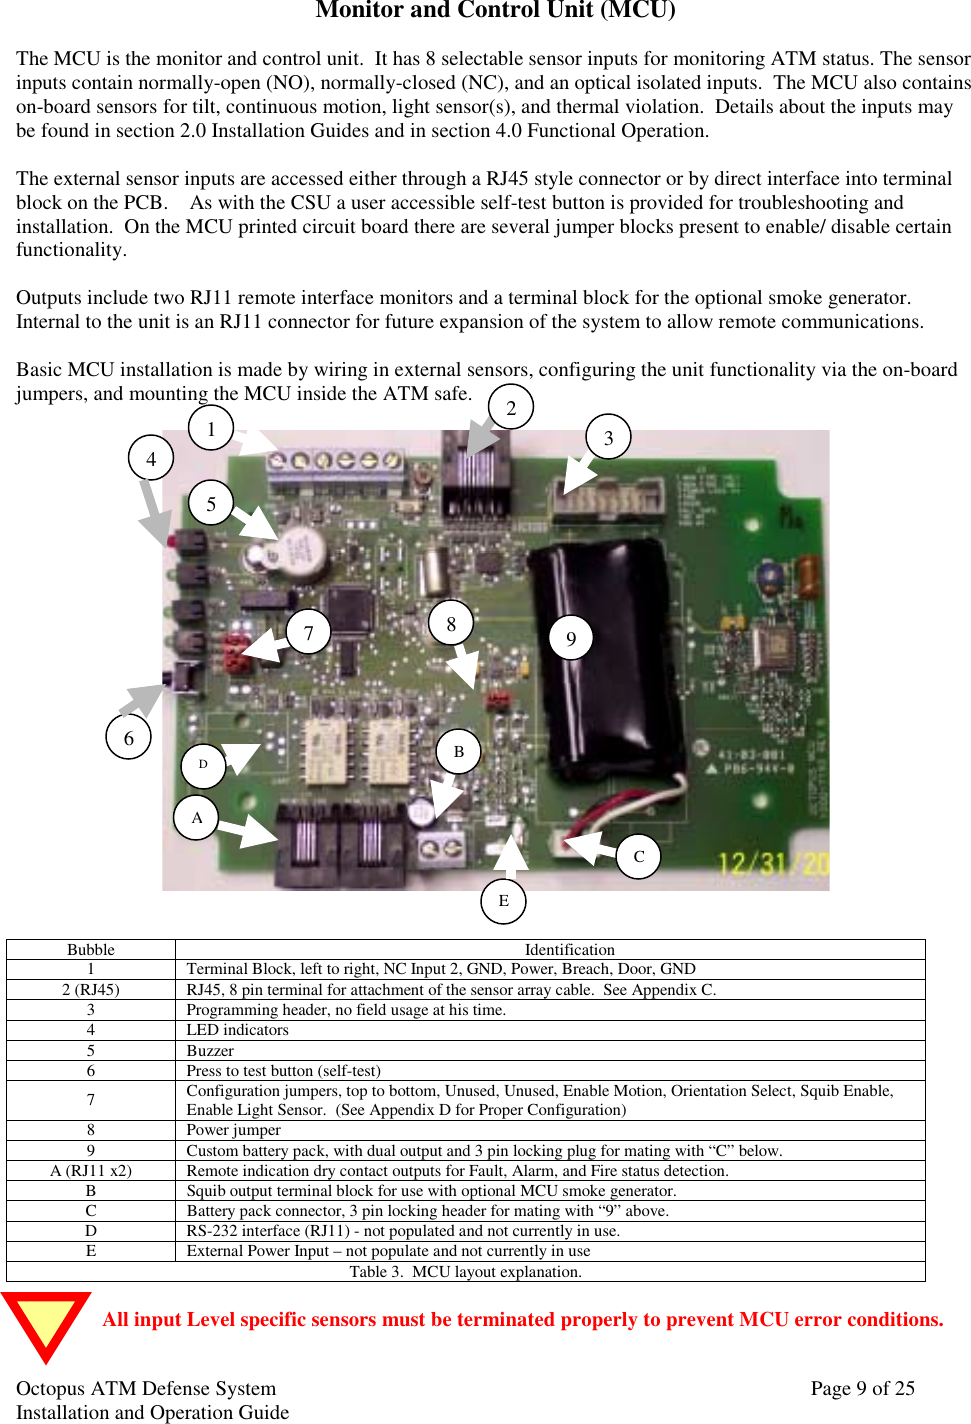 Octopus ATM Defense SystemInstallation and Operation Guide Page 9 of 25Monitor and Control Unit (MCU)The MCU is the monitor and control unit.  It has 8 selectable sensor inputs for monitoring ATM status. The sensorinputs contain normally-open (NO), normally-closed (NC), and an optical isolated inputs.  The MCU also containson-board sensors for tilt, continuous motion, light sensor(s), and thermal violation.  Details about the inputs maybe found in section 2.0 Installation Guides and in section 4.0 Functional Operation.The external sensor inputs are accessed either through a RJ45 style connector or by direct interface into terminalblock on the PCB.    As with the CSU a user accessible self-test button is provided for troubleshooting andinstallation.  On the MCU printed circuit board there are several jumper blocks present to enable/ disable certainfunctionality.Outputs include two RJ11 remote interface monitors and a terminal block for the optional smoke generator.Internal to the unit is an RJ11 connector for future expansion of the system to allow remote communications.Basic MCU installation is made by wiring in external sensors, configuring the unit functionality via the on-boardjumpers, and mounting the MCU inside the ATM safe.Bubble Identification1 Terminal Block, left to right, NC Input 2, GND, Power, Breach, Door, GND2 (RJ45) RJ45, 8 pin terminal for attachment of the sensor array cable.  See Appendix C.3 Programming header, no field usage at his time.4 LED indicators5 Buzzer6 Press to test button (self-test)7Configuration jumpers, top to bottom, Unused, Unused, Enable Motion, Orientation Select, Squib Enable,Enable Light Sensor.  (See Appendix D for Proper Configuration)8 Power jumper9 Custom battery pack, with dual output and 3 pin locking plug for mating with “C” below.A (RJ11 x2) Remote indication dry contact outputs for Fault, Alarm, and Fire status detection.B Squib output terminal block for use with optional MCU smoke generator.C Battery pack connector, 3 pin locking header for mating with “9” above.D RS-232 interface (RJ11) - not populated and not currently in use.E External Power Input – not populate and not currently in useTable 3.  MCU layout explanation.All input Level specific sensors must be terminated properly to prevent MCU error conditions.145689ABCE237D